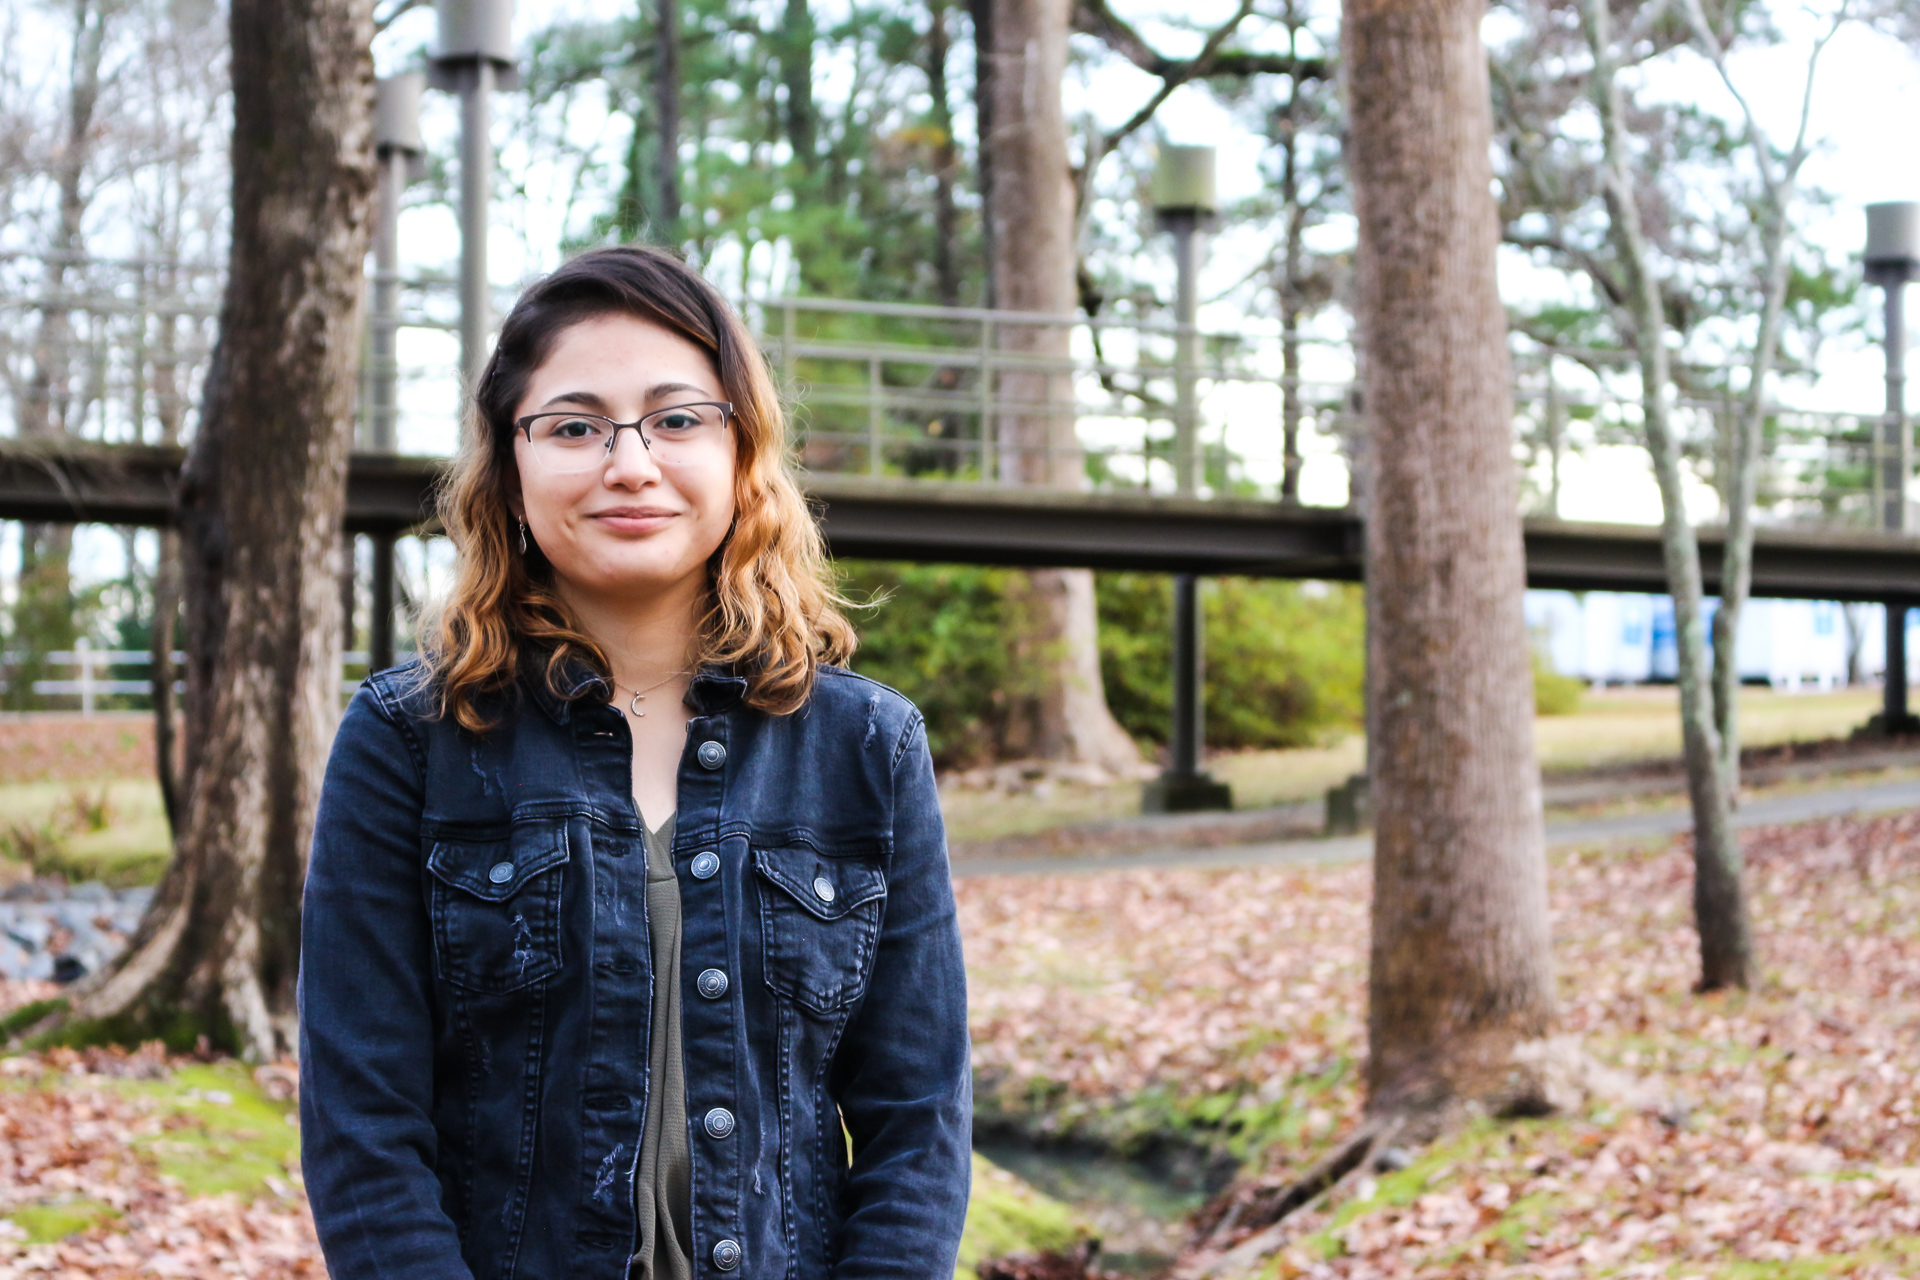 A student in front of trees and walkway